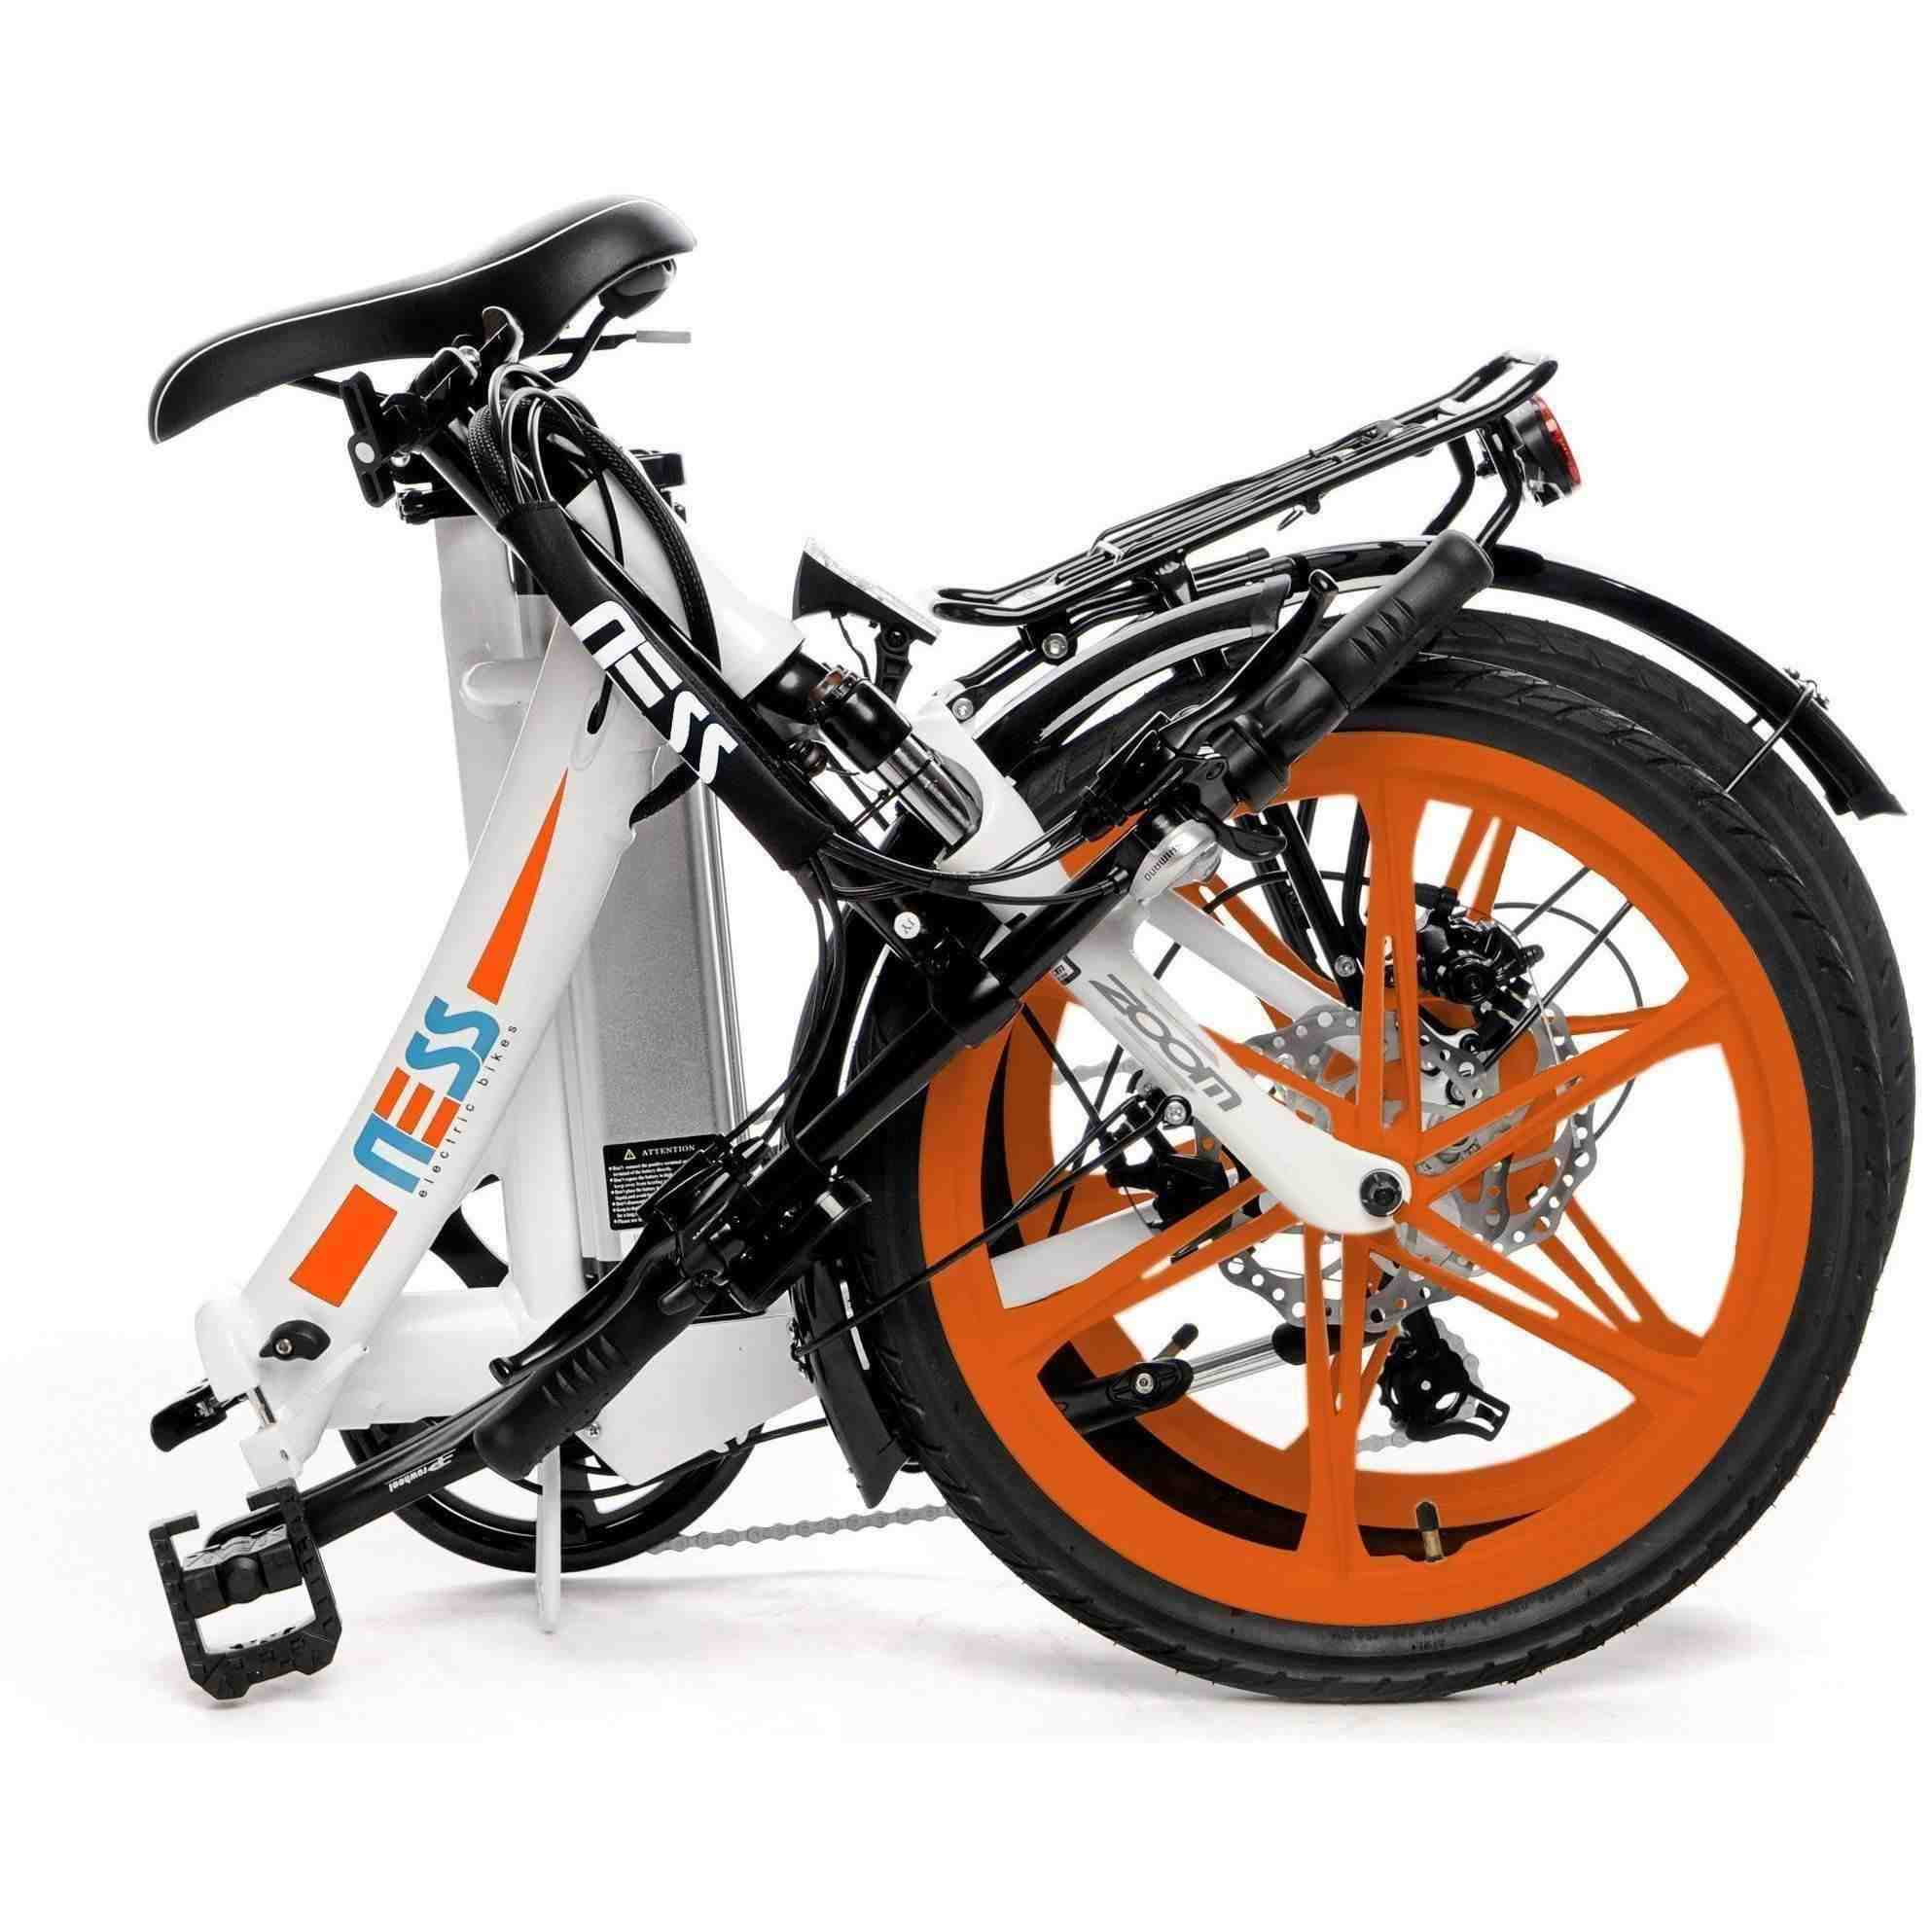 What is the most powerful electric bike?